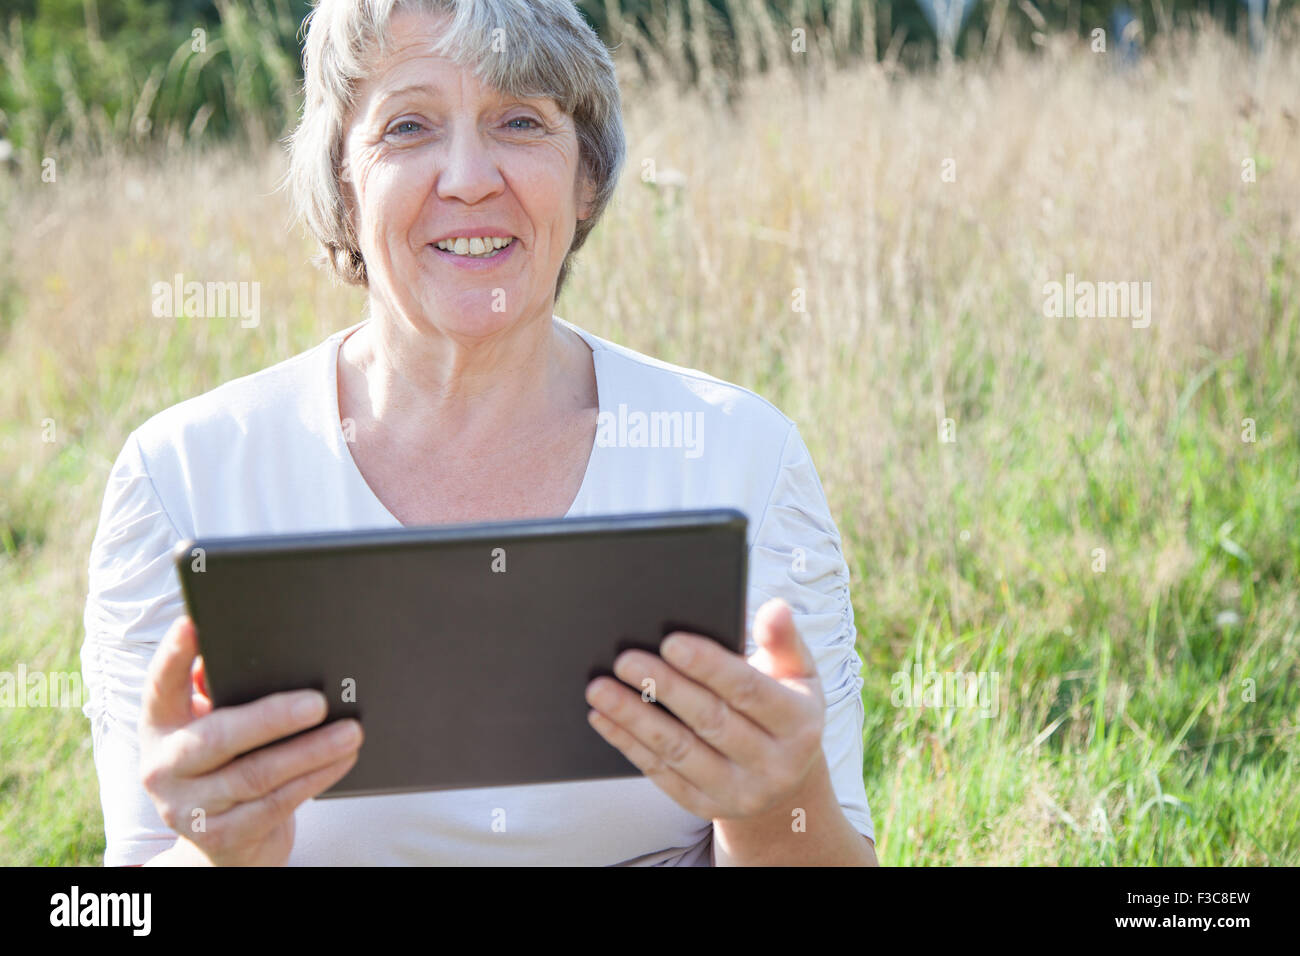 Old age woman using tablet device Stock Photo